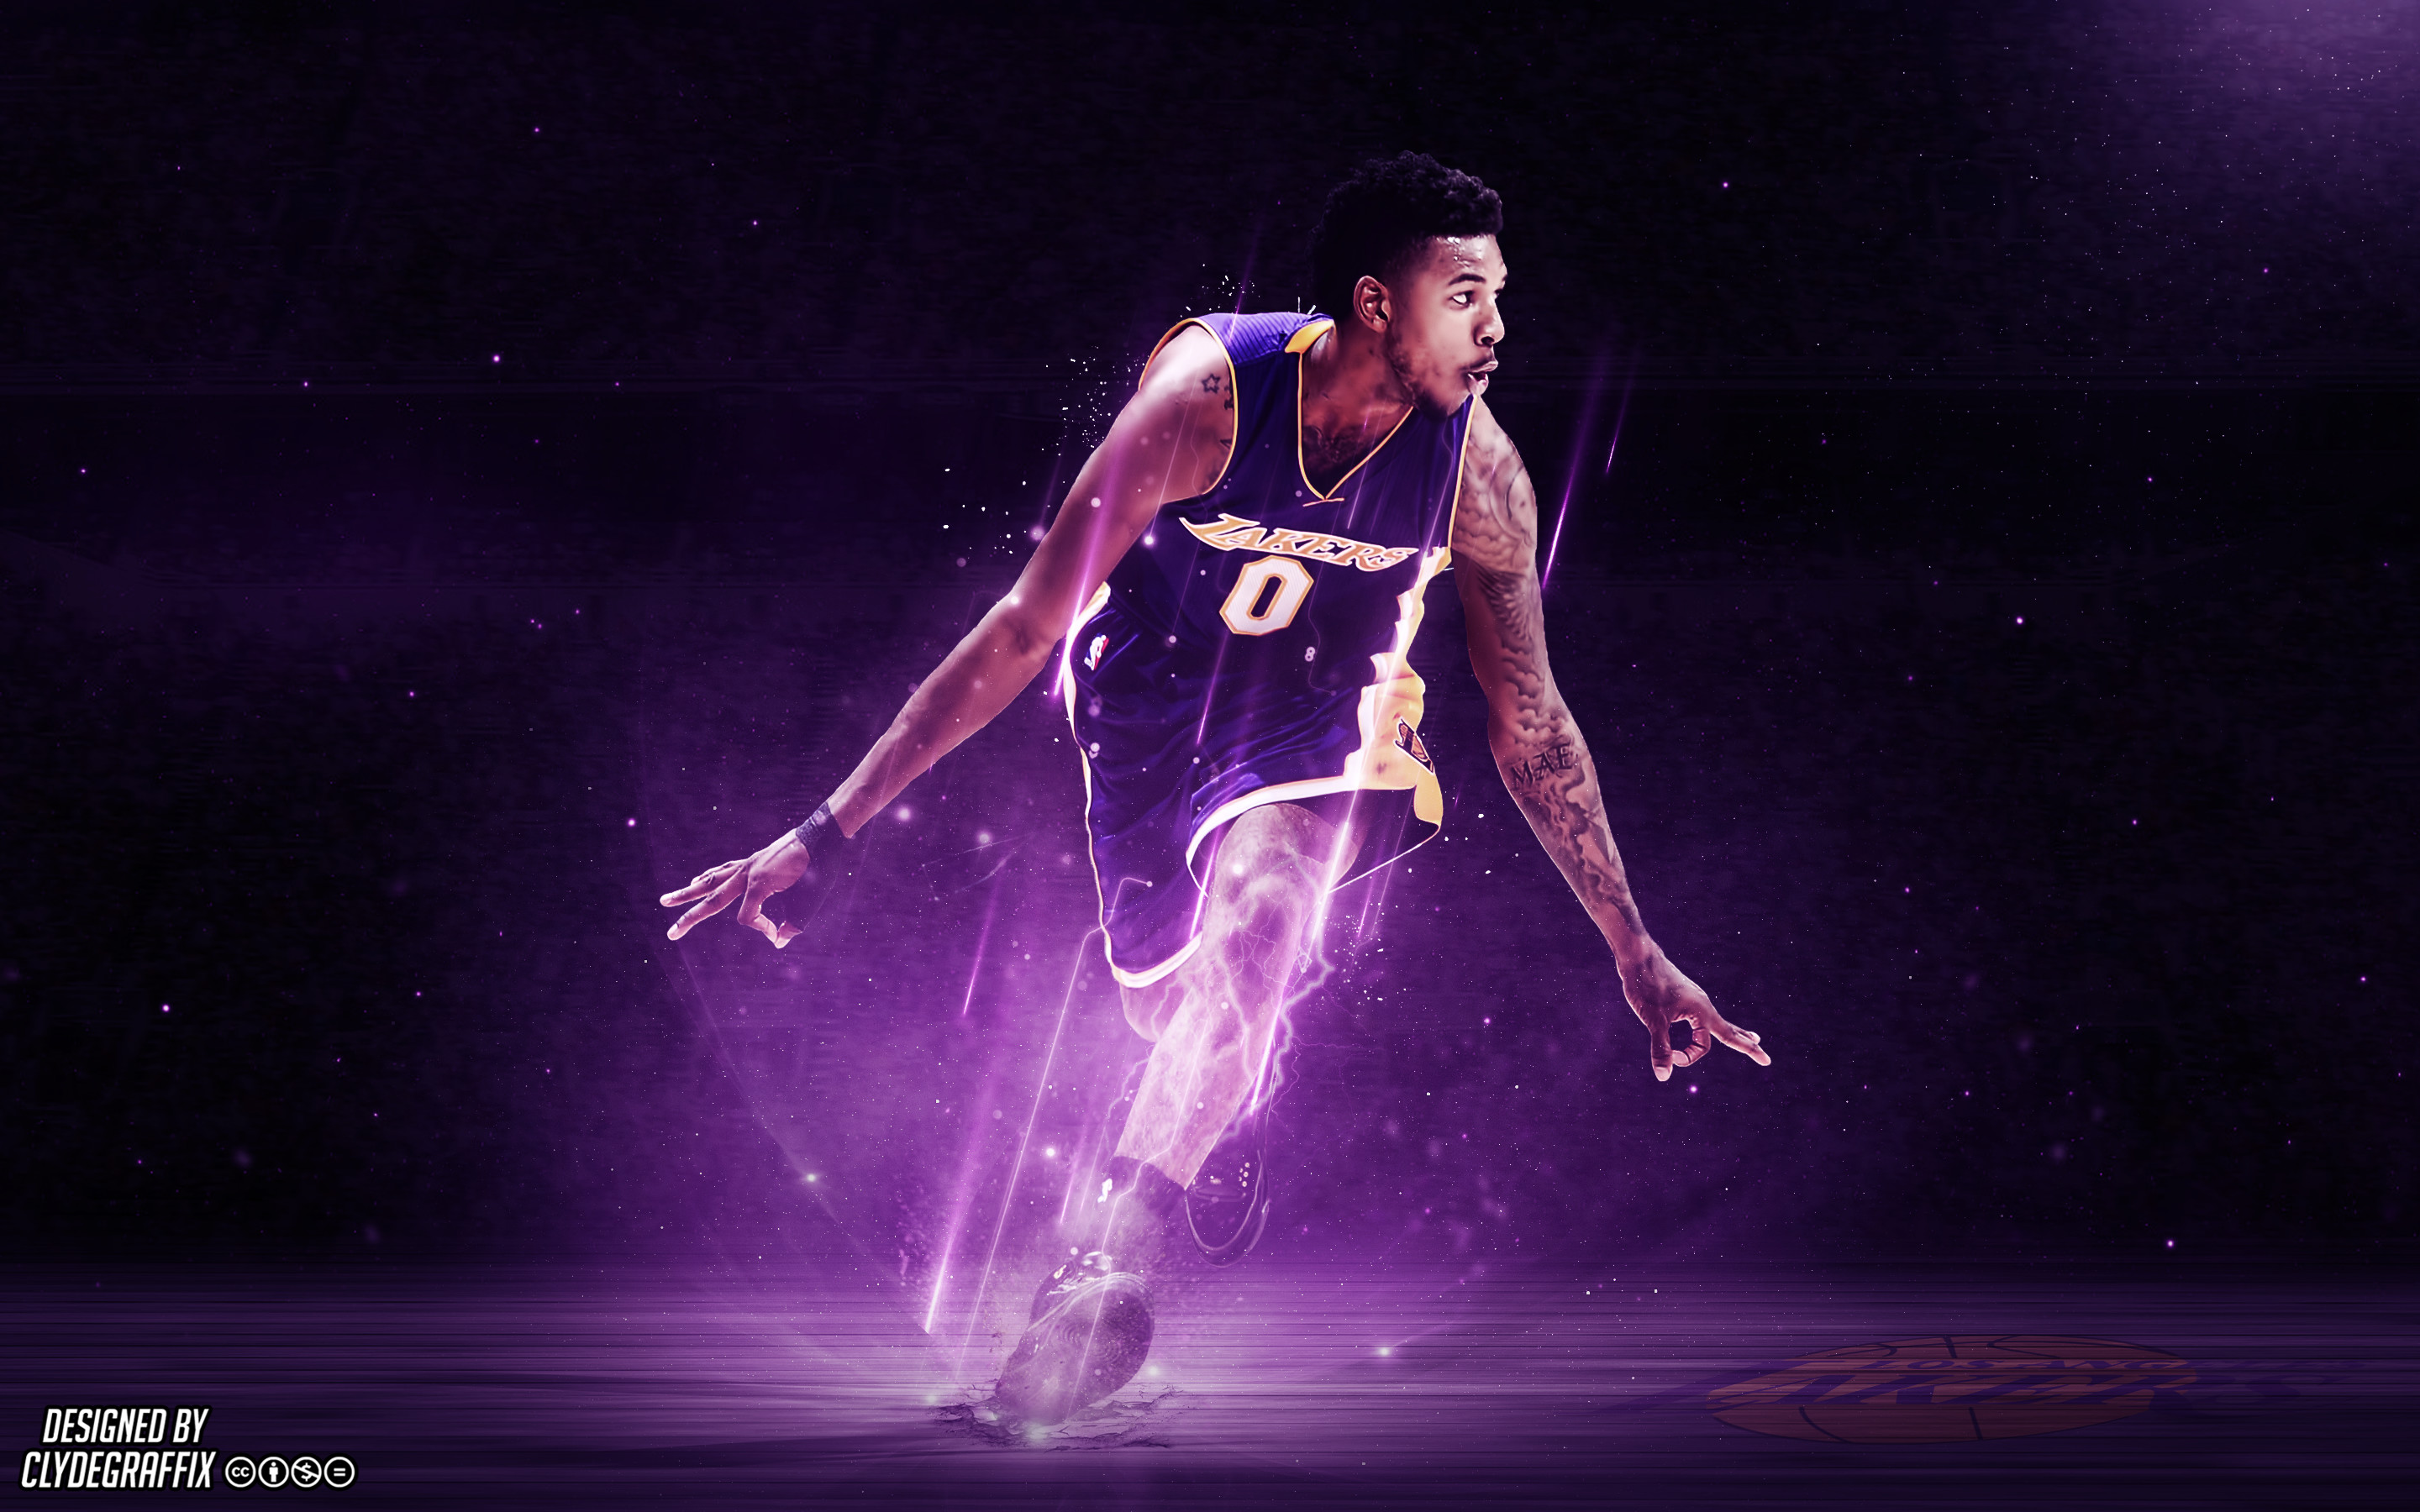 2880x1800 Made a Nick Young wallpaper I thought some of you might like!